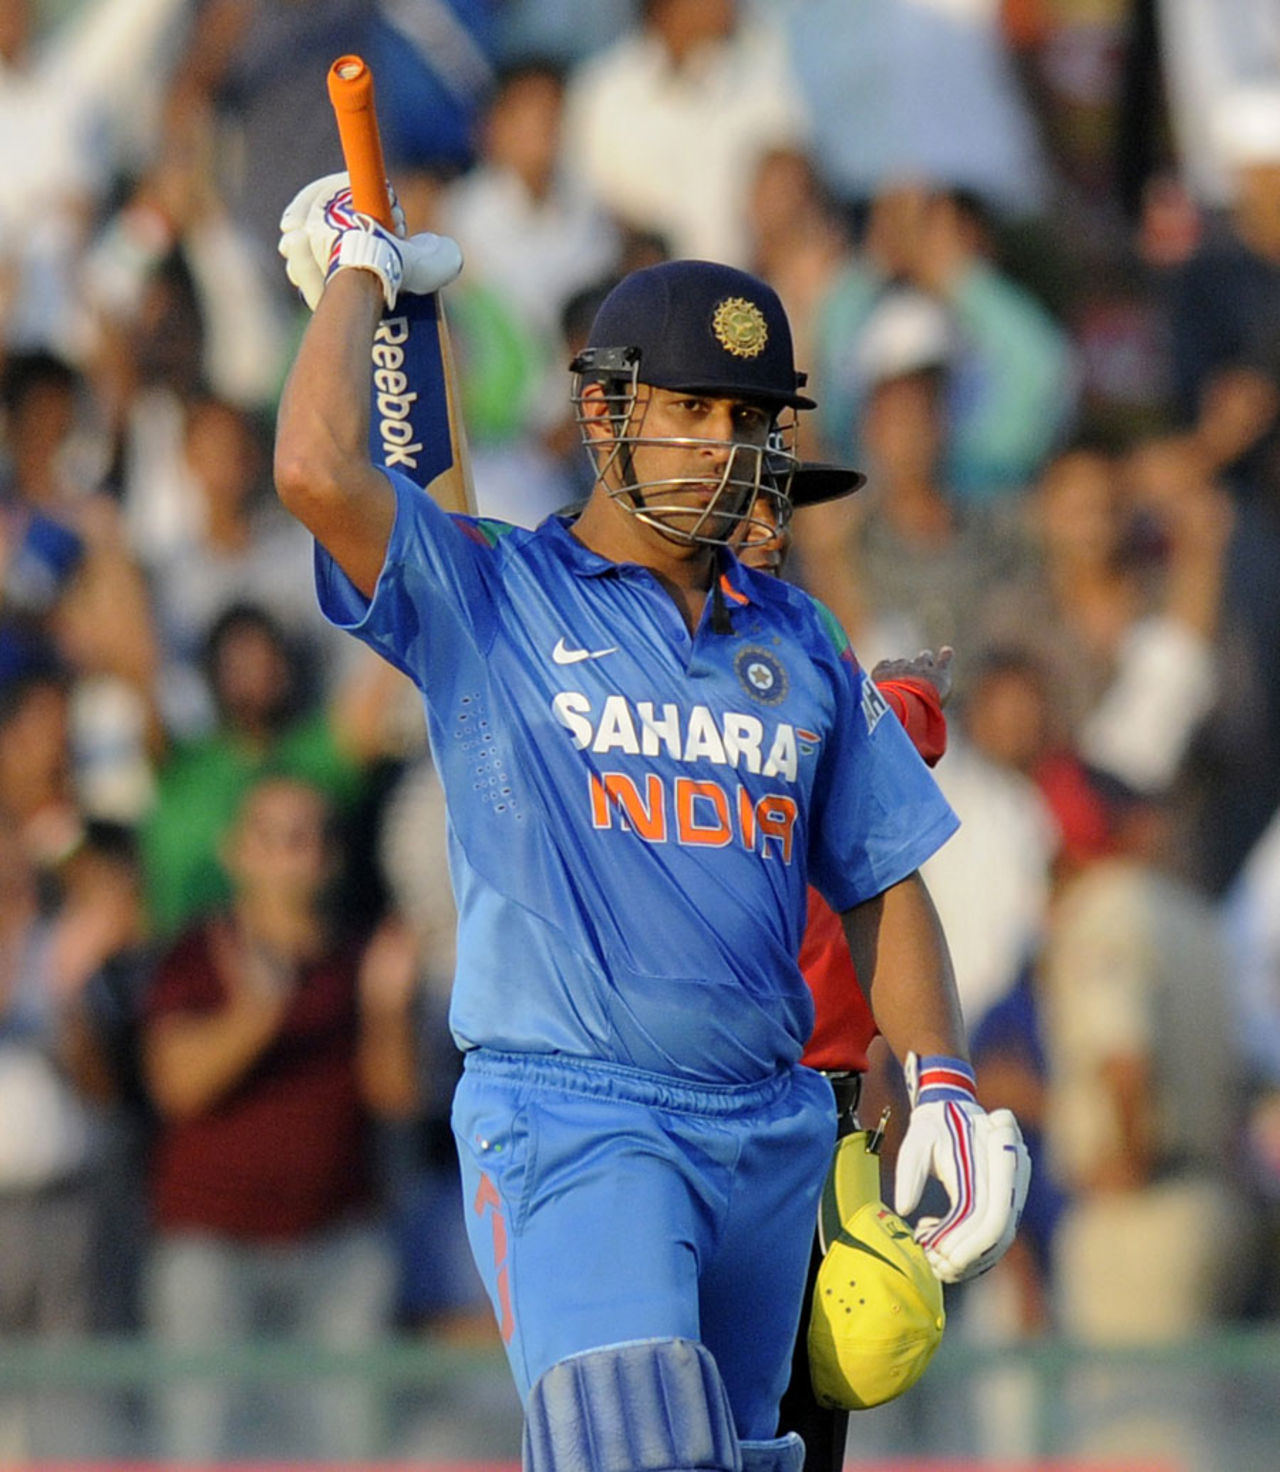 MS Dhoni acknowledges the applause after scoring his ninth ODI hundred, India v Australia, 3rd ODI, Mohali, October 19, 2013